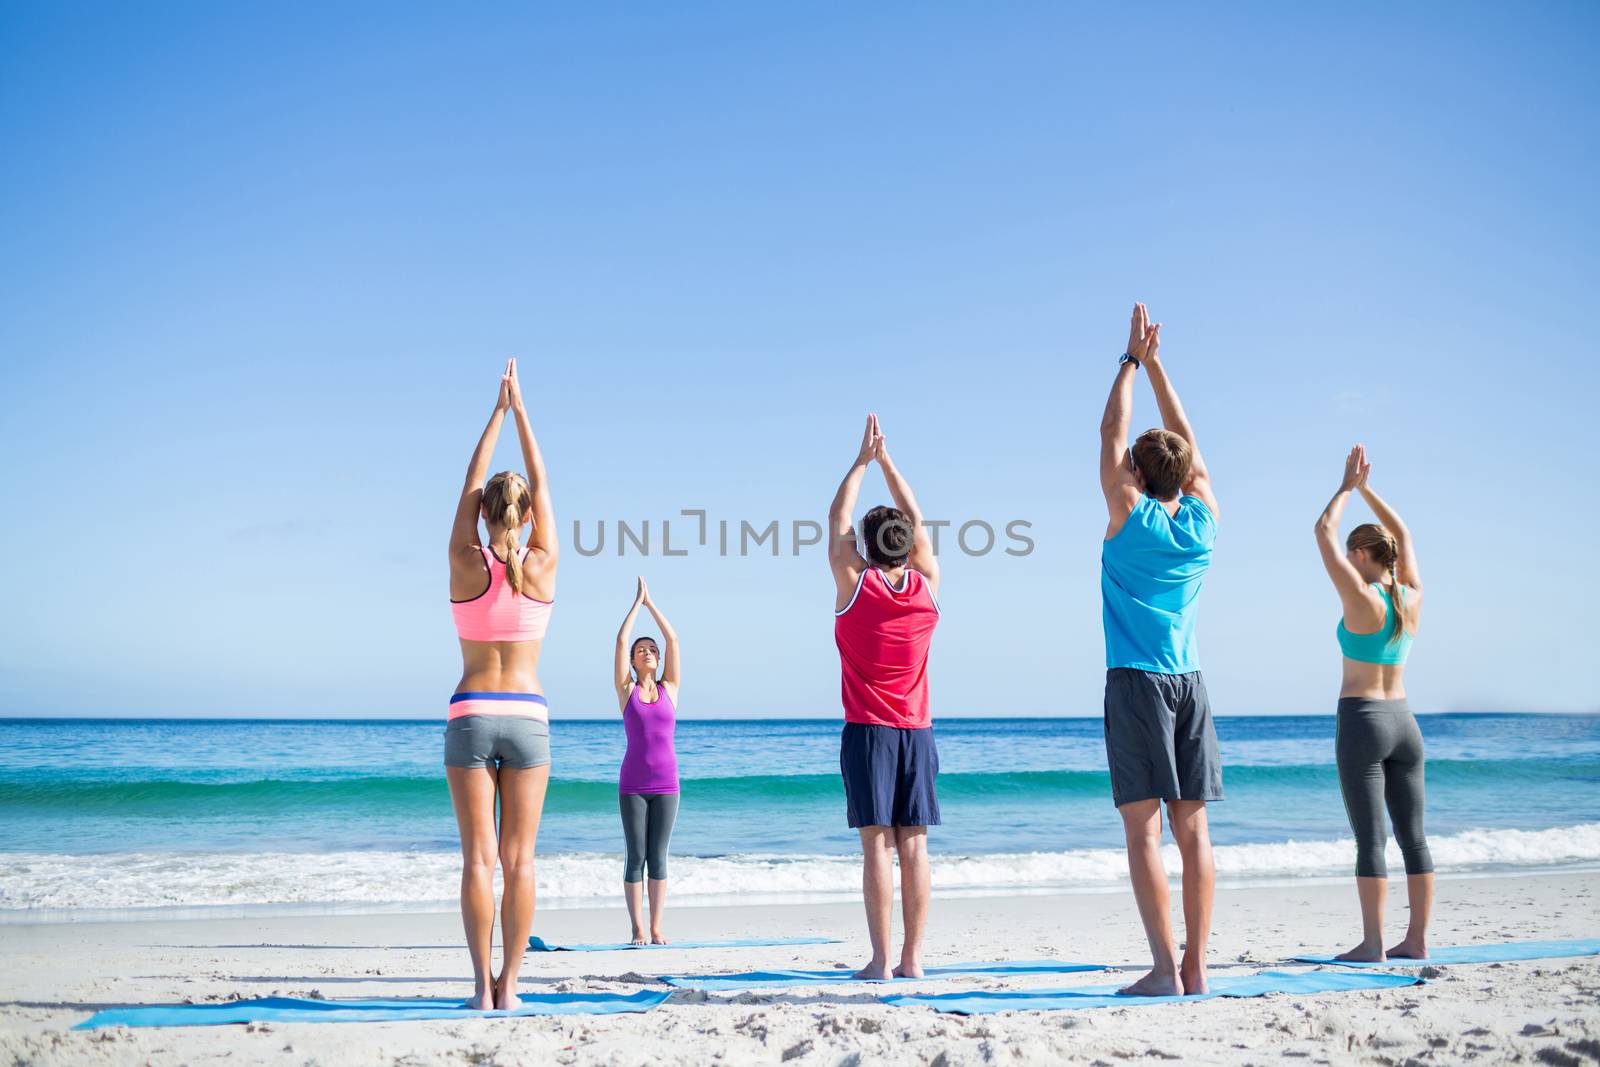 Friends doing yoga together with their teacher at the beach